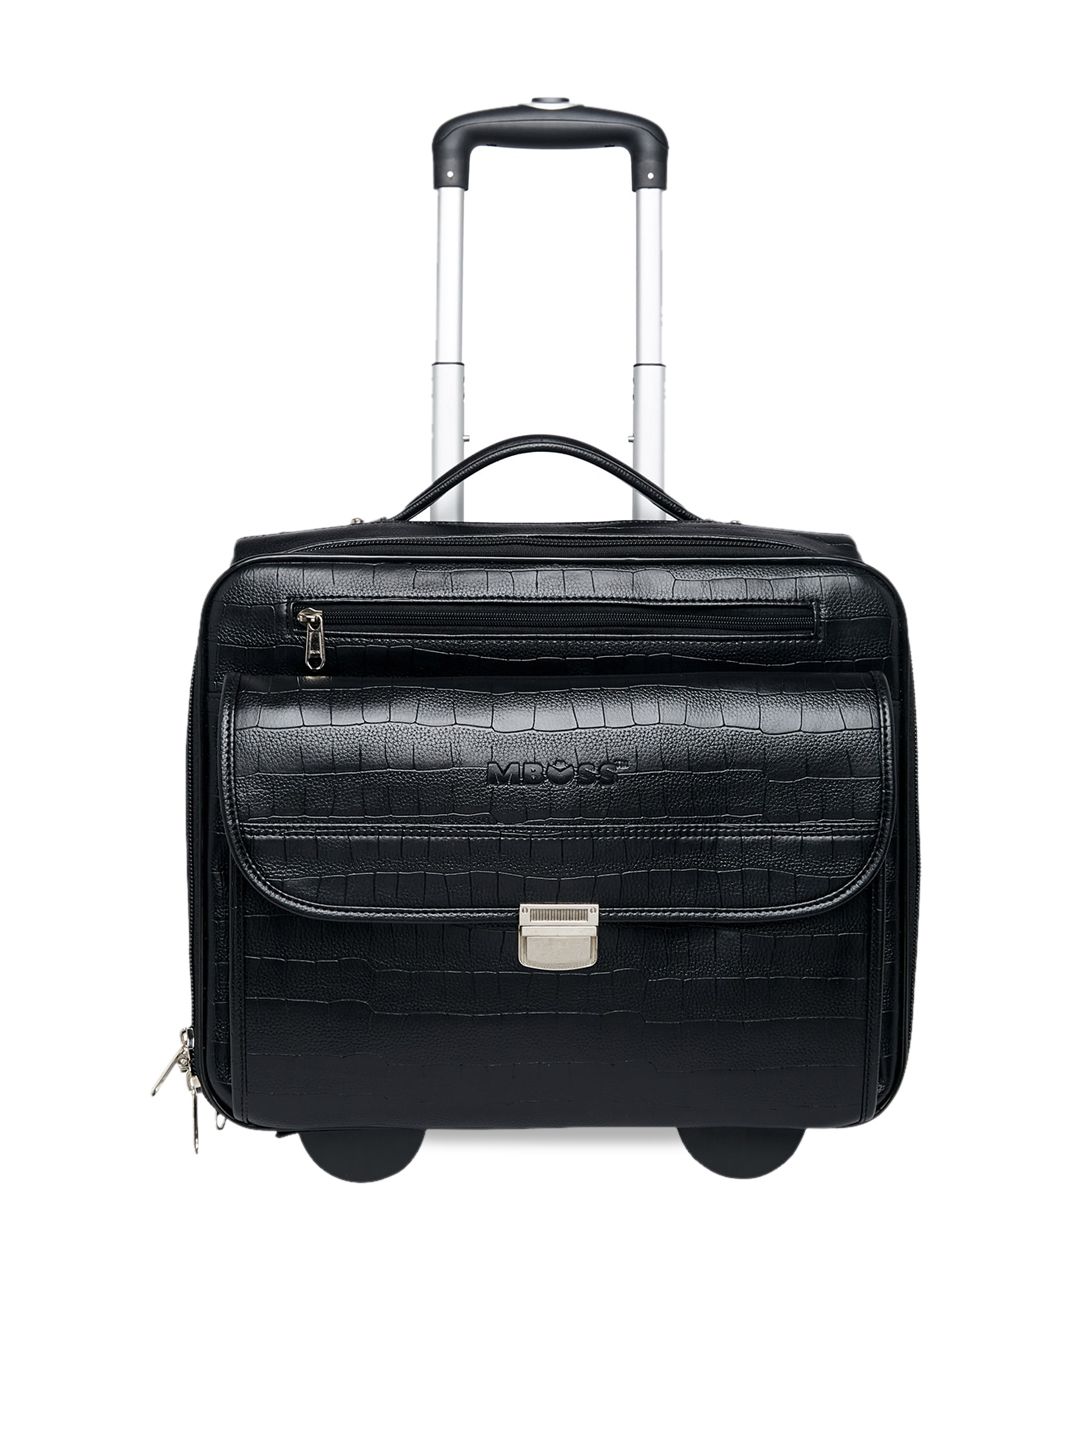 MBOSS Black Solid Laptop Trolley Bag Price in India